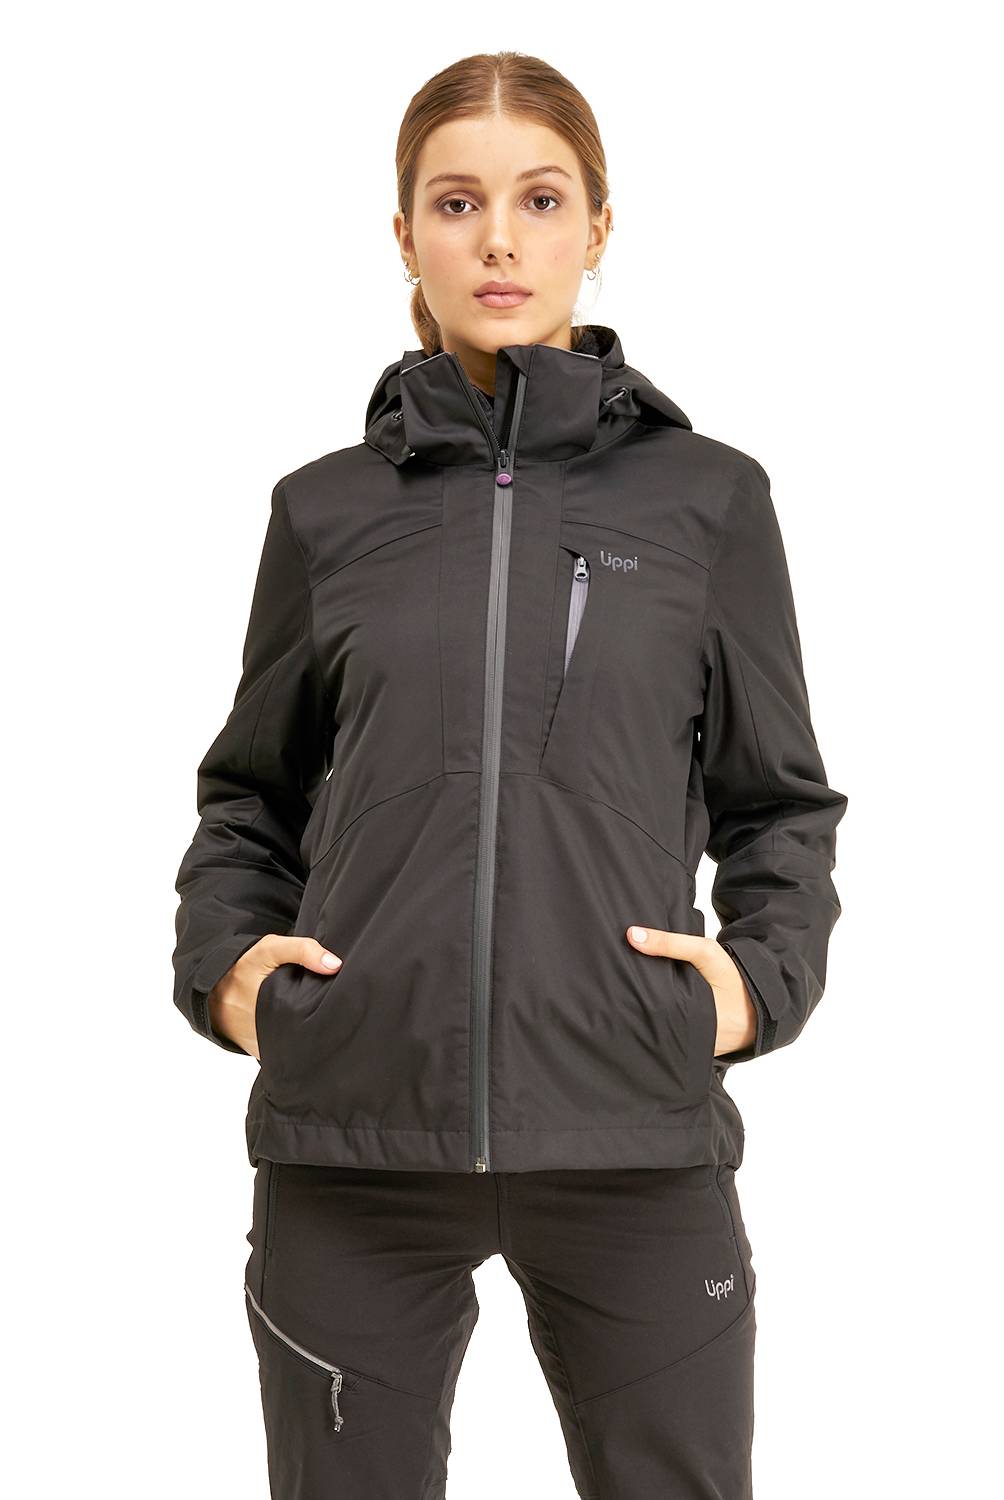 LIPPI - Chaqueta Outdoor 3 Cruces Mujer